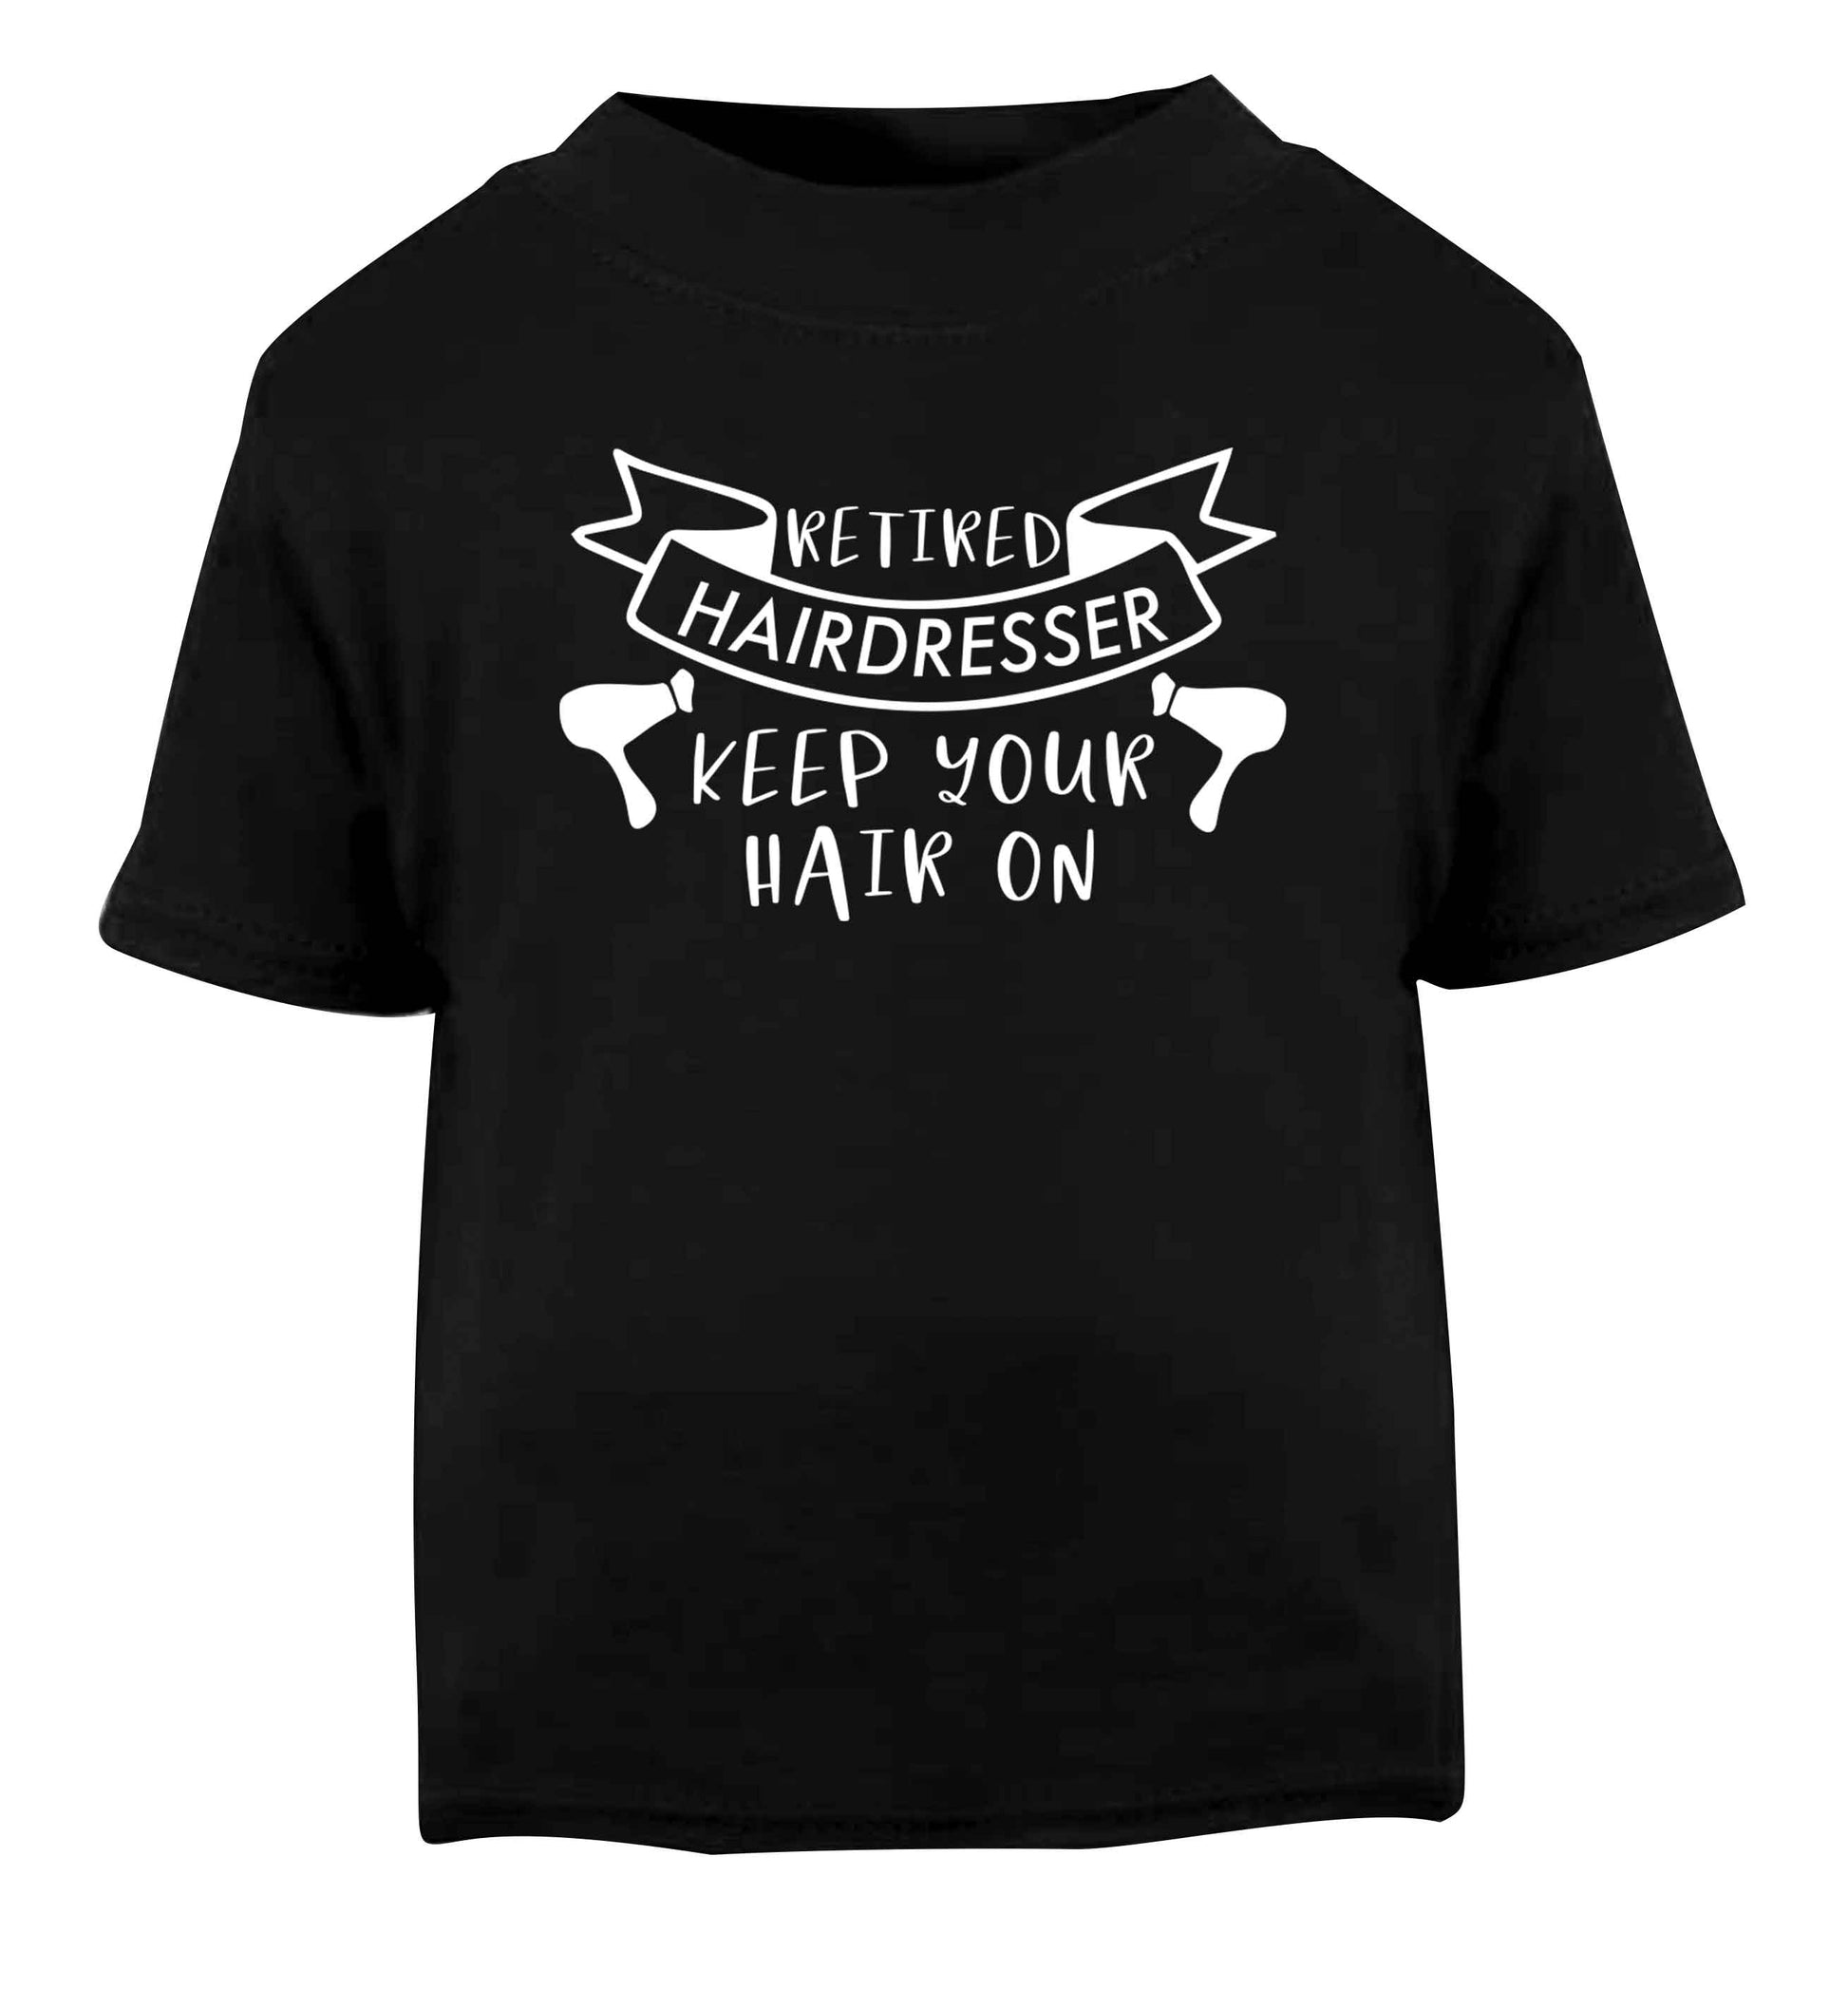 Retired hairdresser keep your hair on Black Baby Toddler Tshirt 2 years